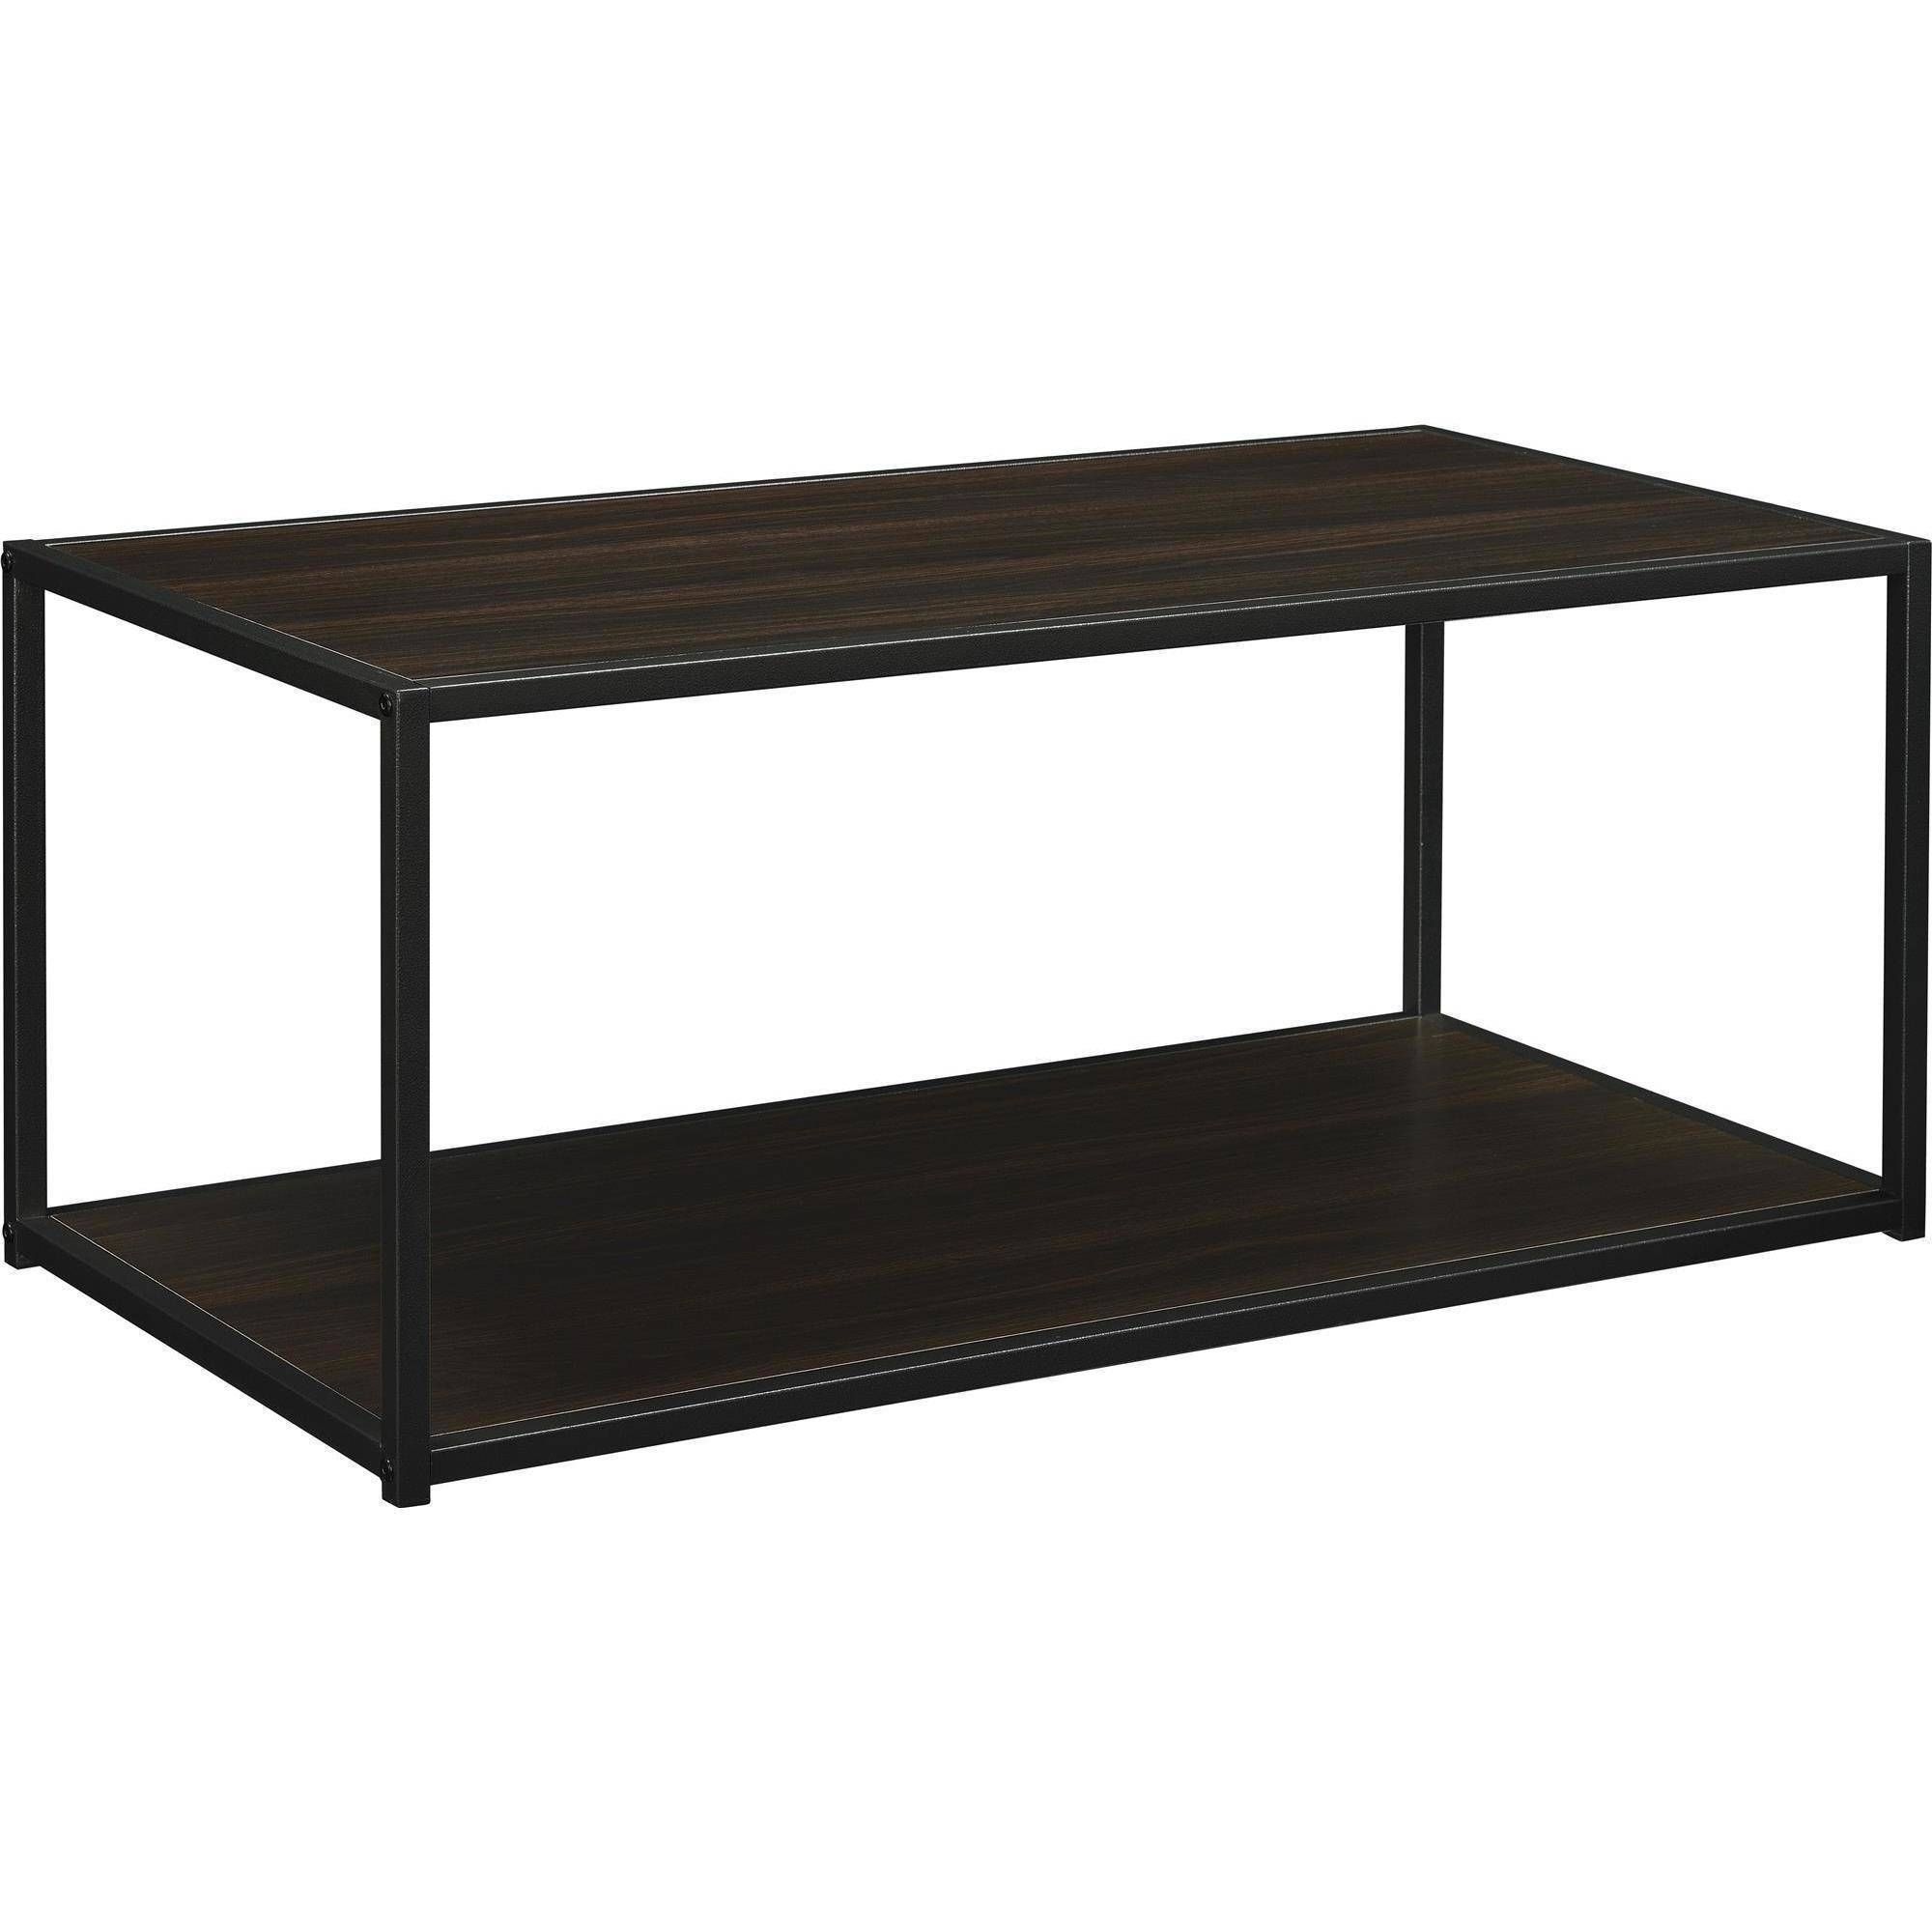 Ameriwood Home Canton Coffee Table With Metal Frame, Distressed Within Wood And Steel Coffee Table (View 11 of 15)